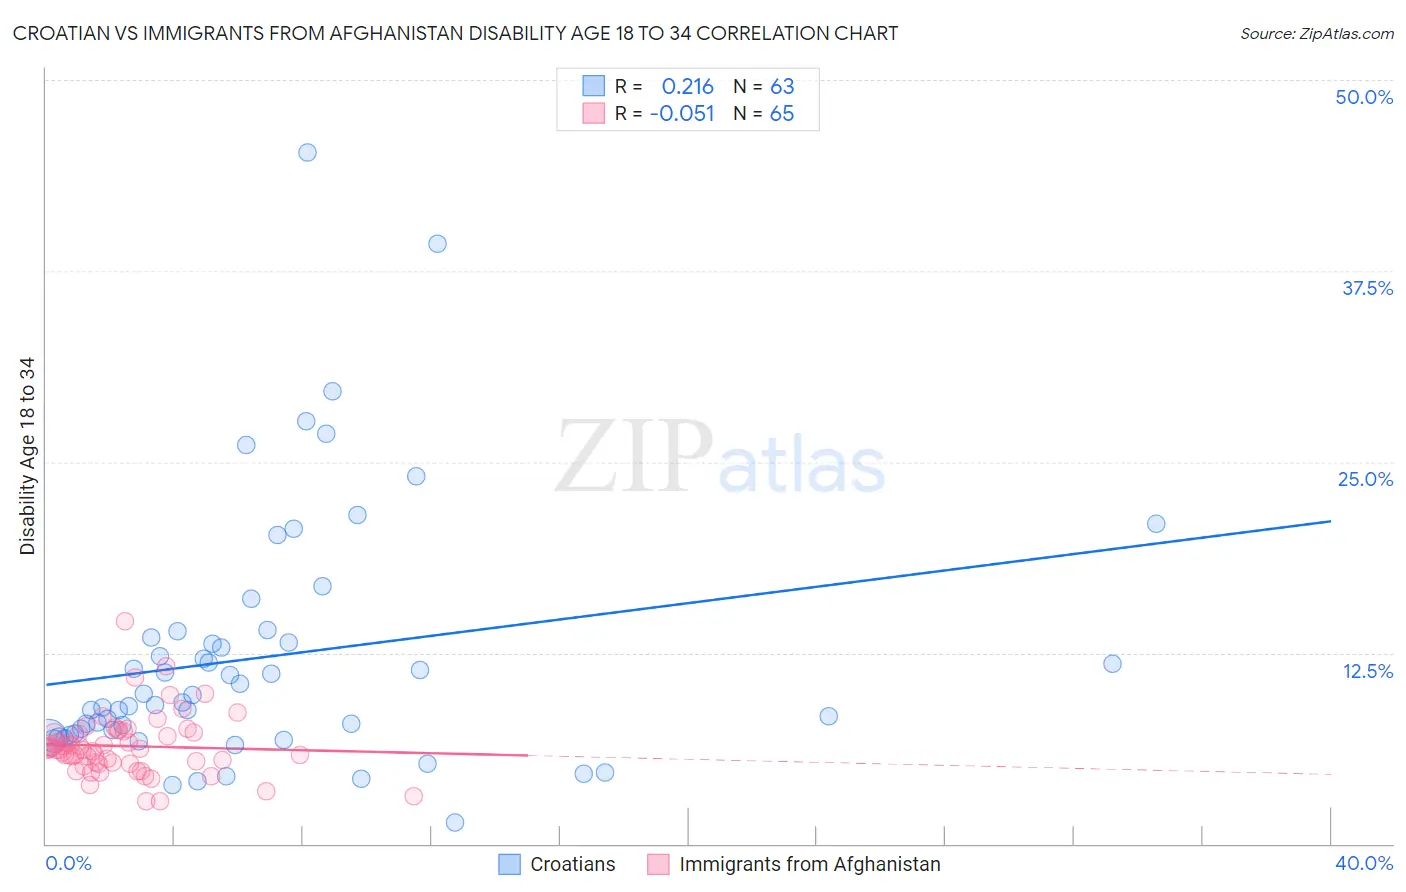 Croatian vs Immigrants from Afghanistan Disability Age 18 to 34